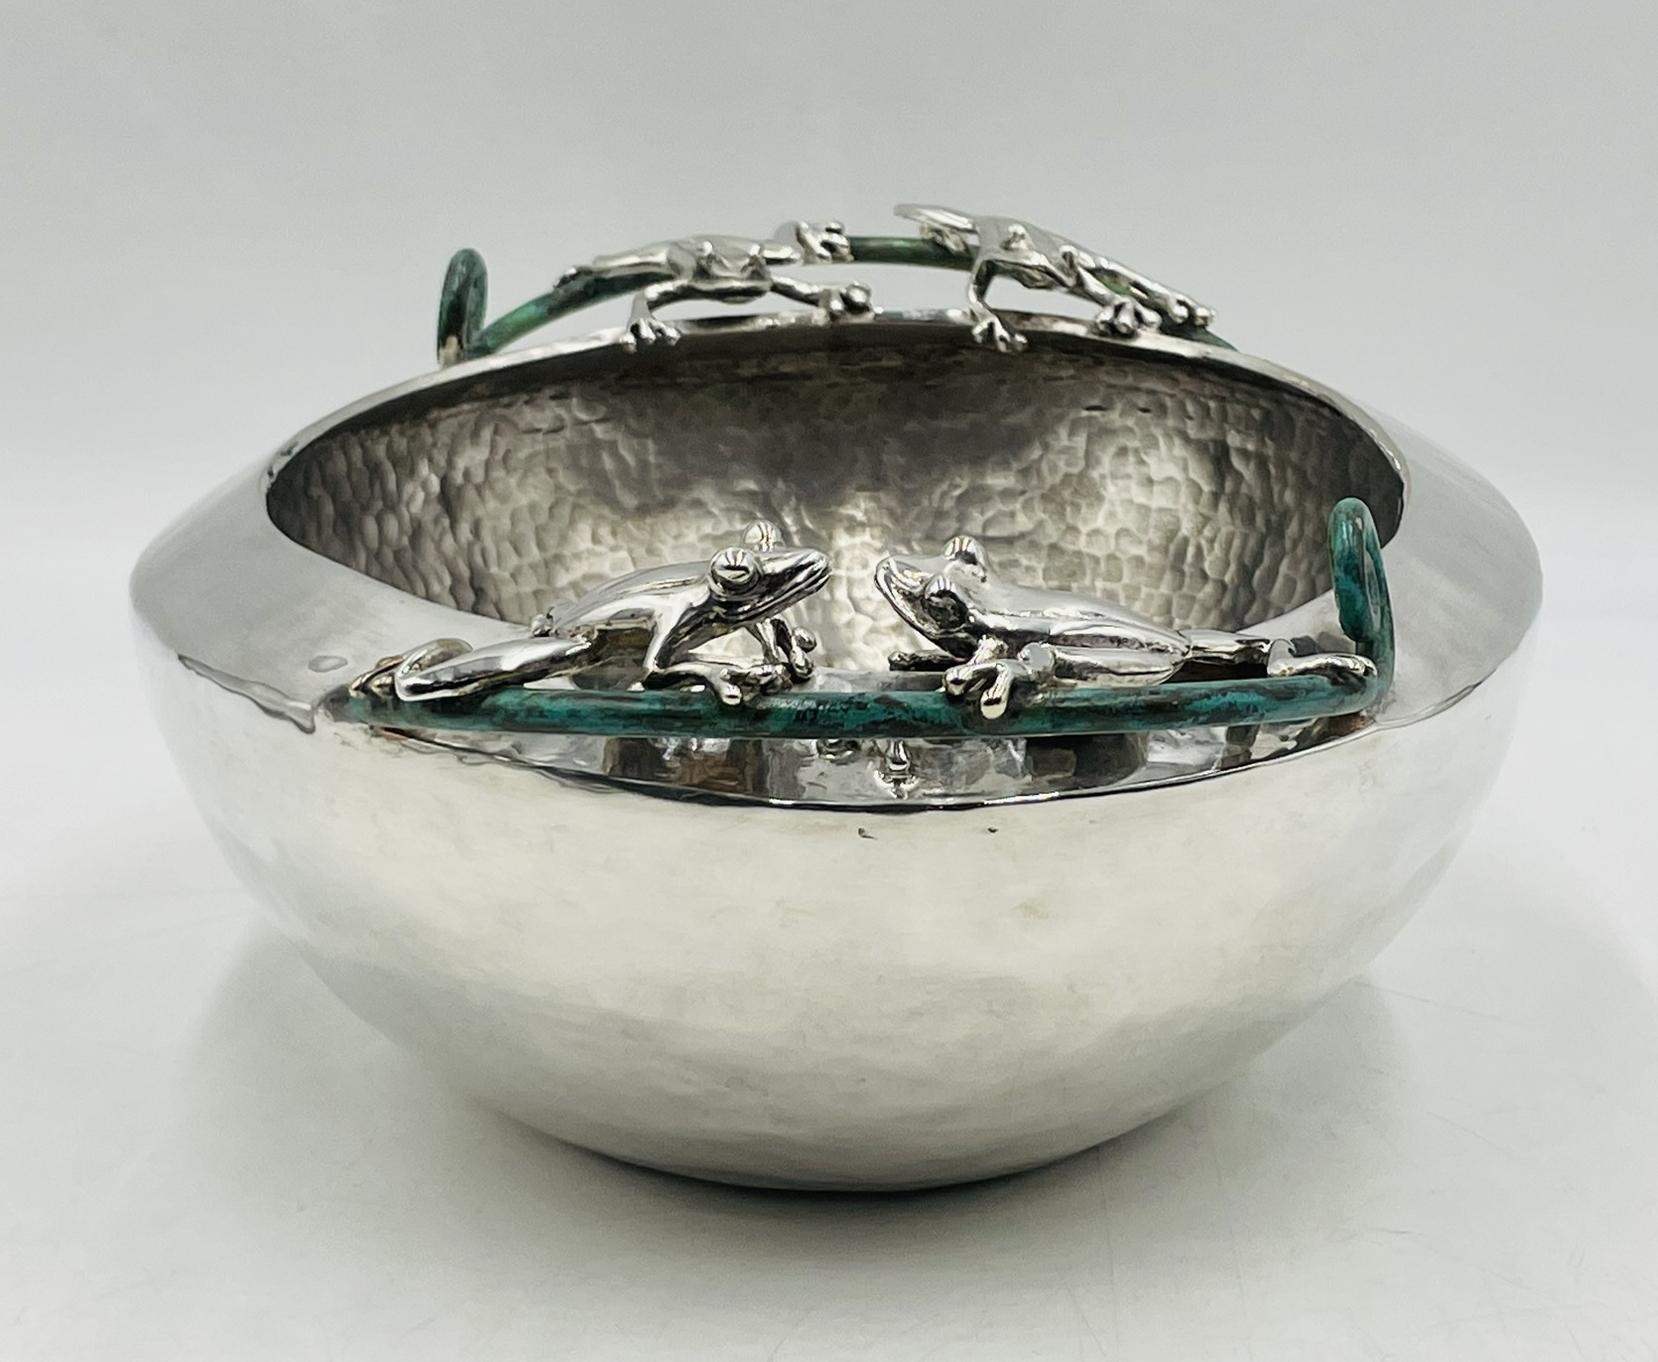 Mexican Large Silver-Plated Bowl With Frogs Handles by Emilia Castillo, Mexico 21st Cent For Sale